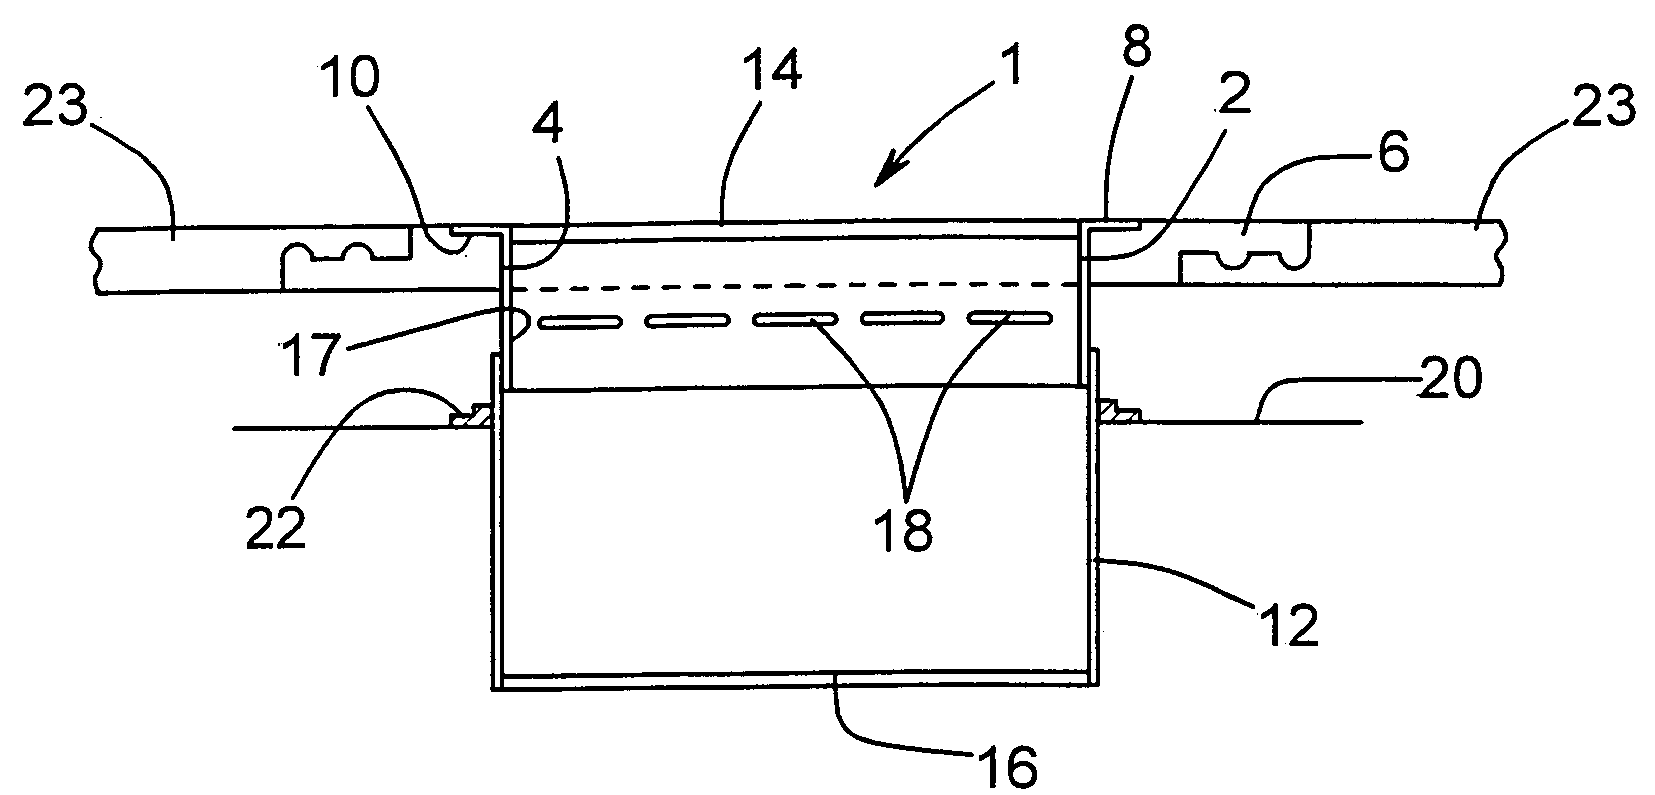 Apparatus for illuminating and/or venting the interior of a building